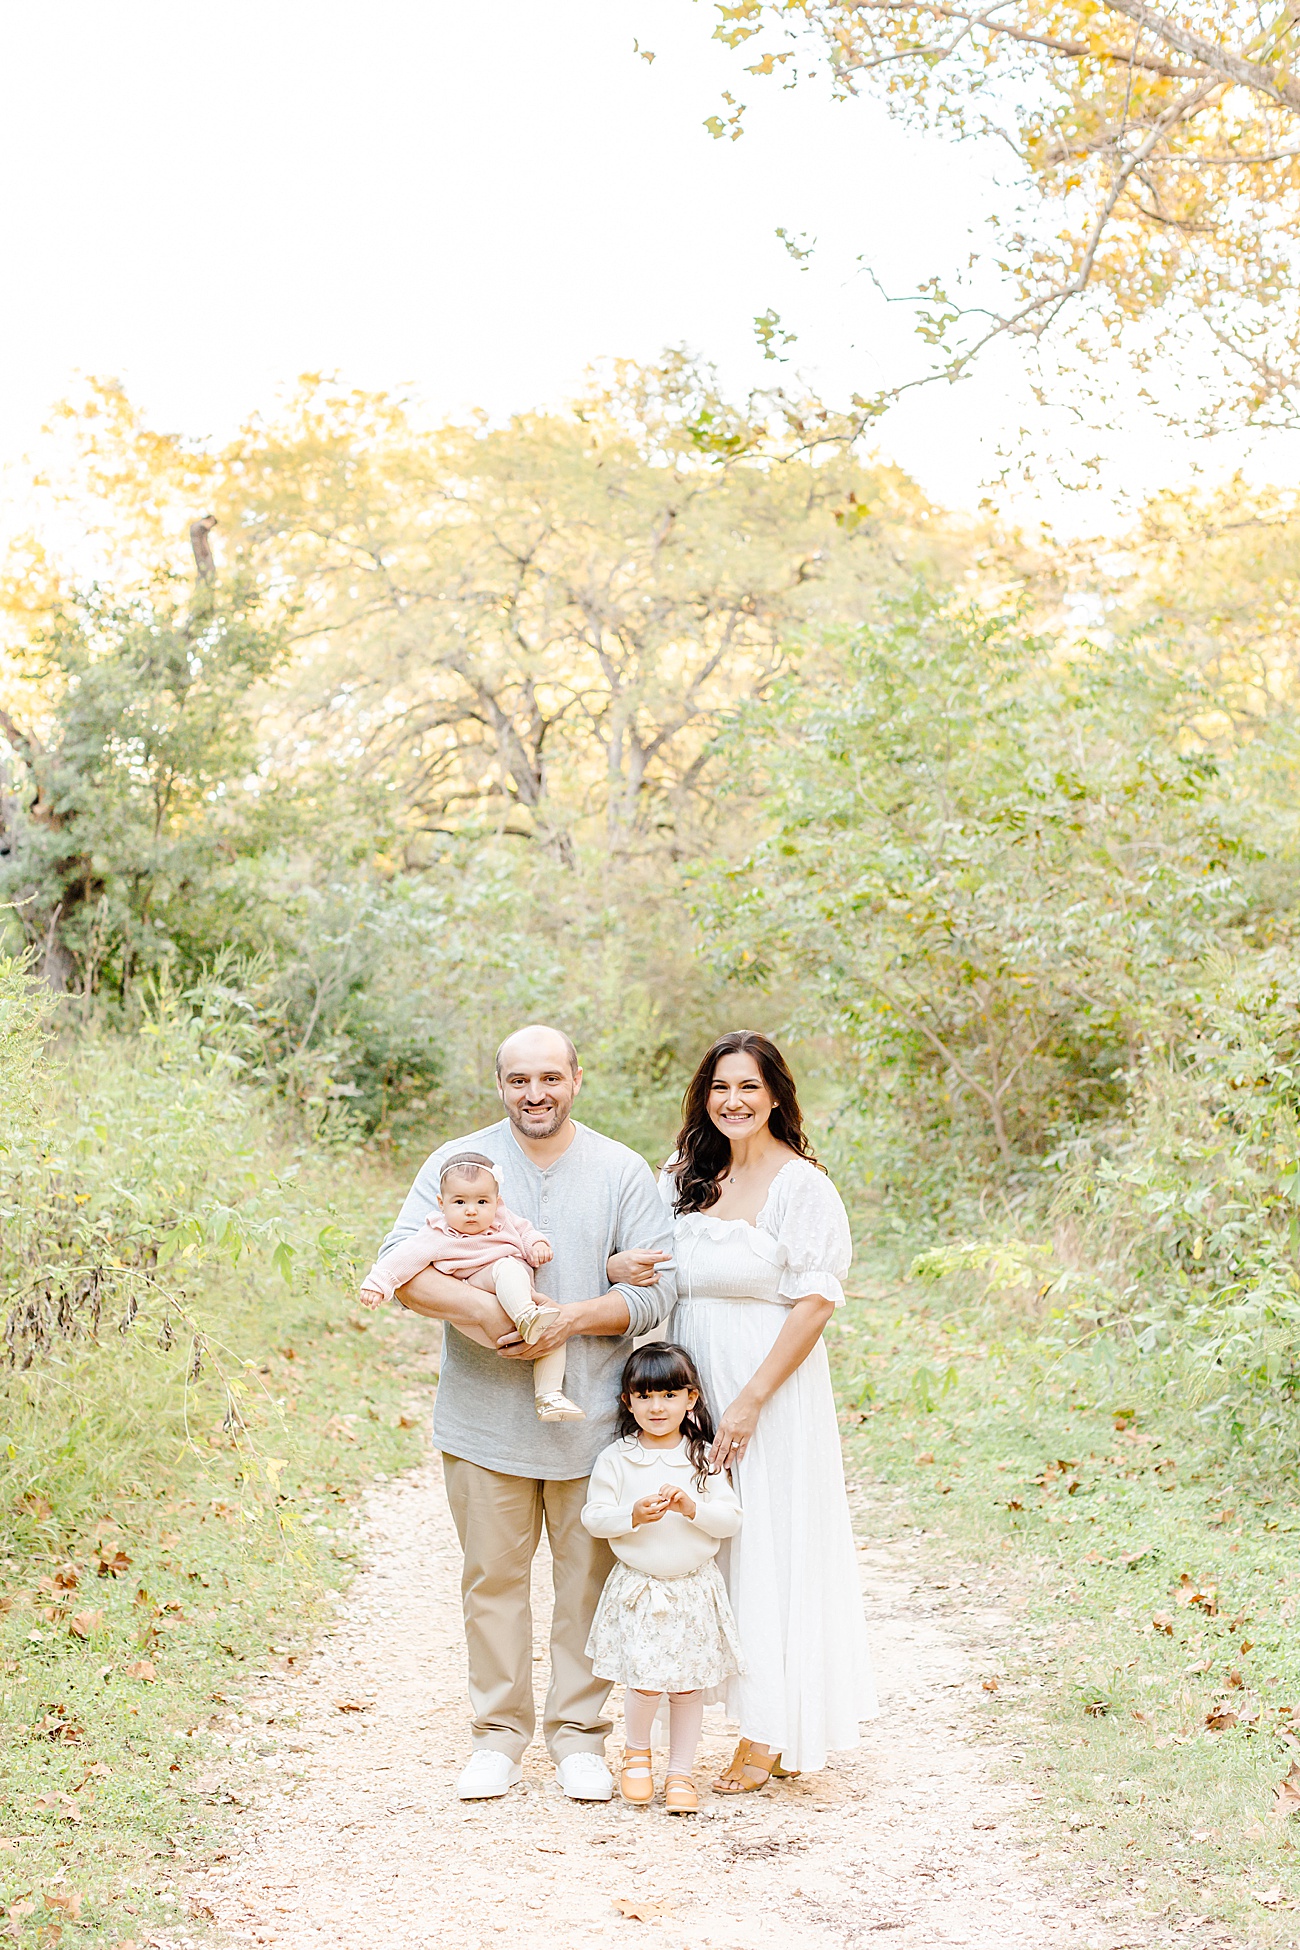 Family of four portrait in beautiful Austin, TX field. Photo by Sana Ahmed Photography.